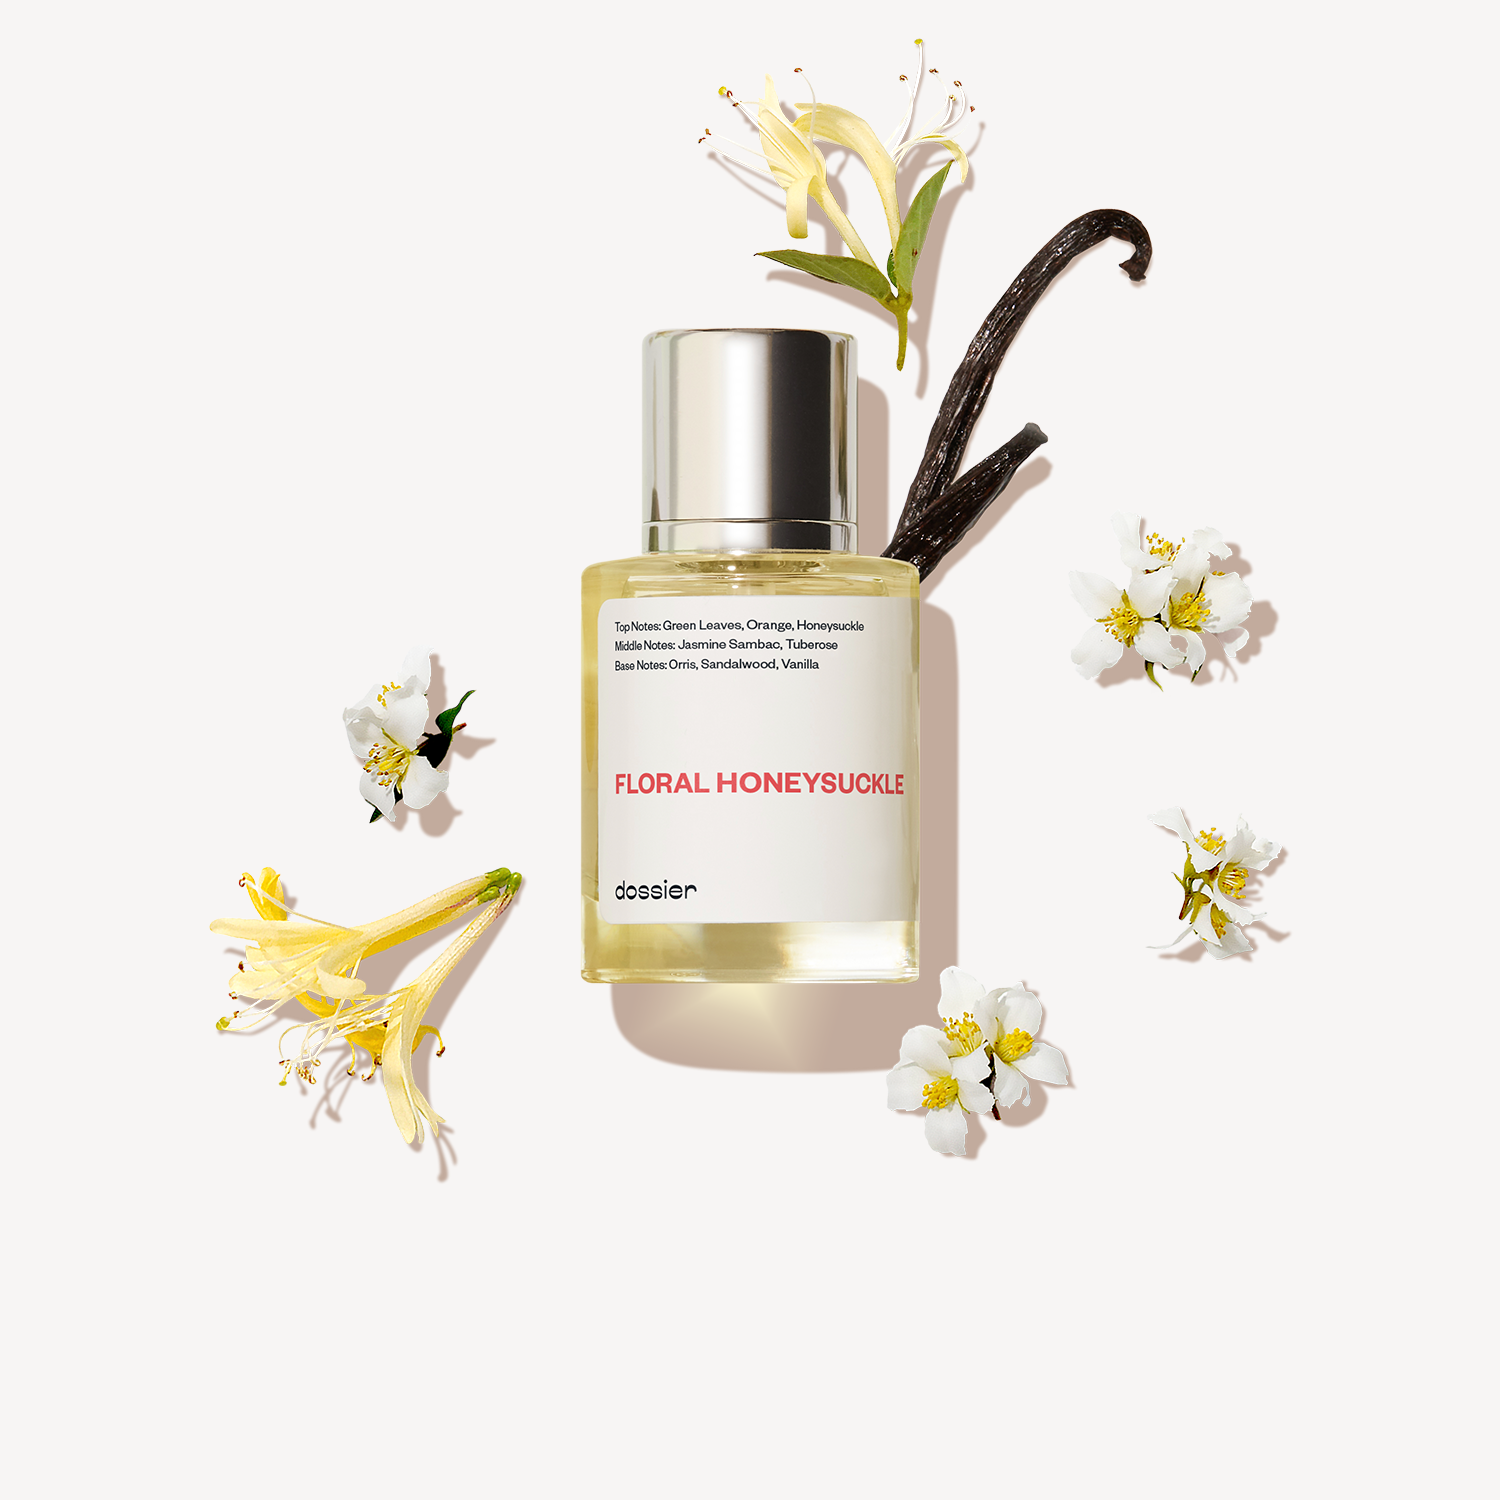 Inspired by Gucci's Bloom - Woman Perfume - Fragrance 50ml/1.7oz - Floral Honeysuckle - Black Friday